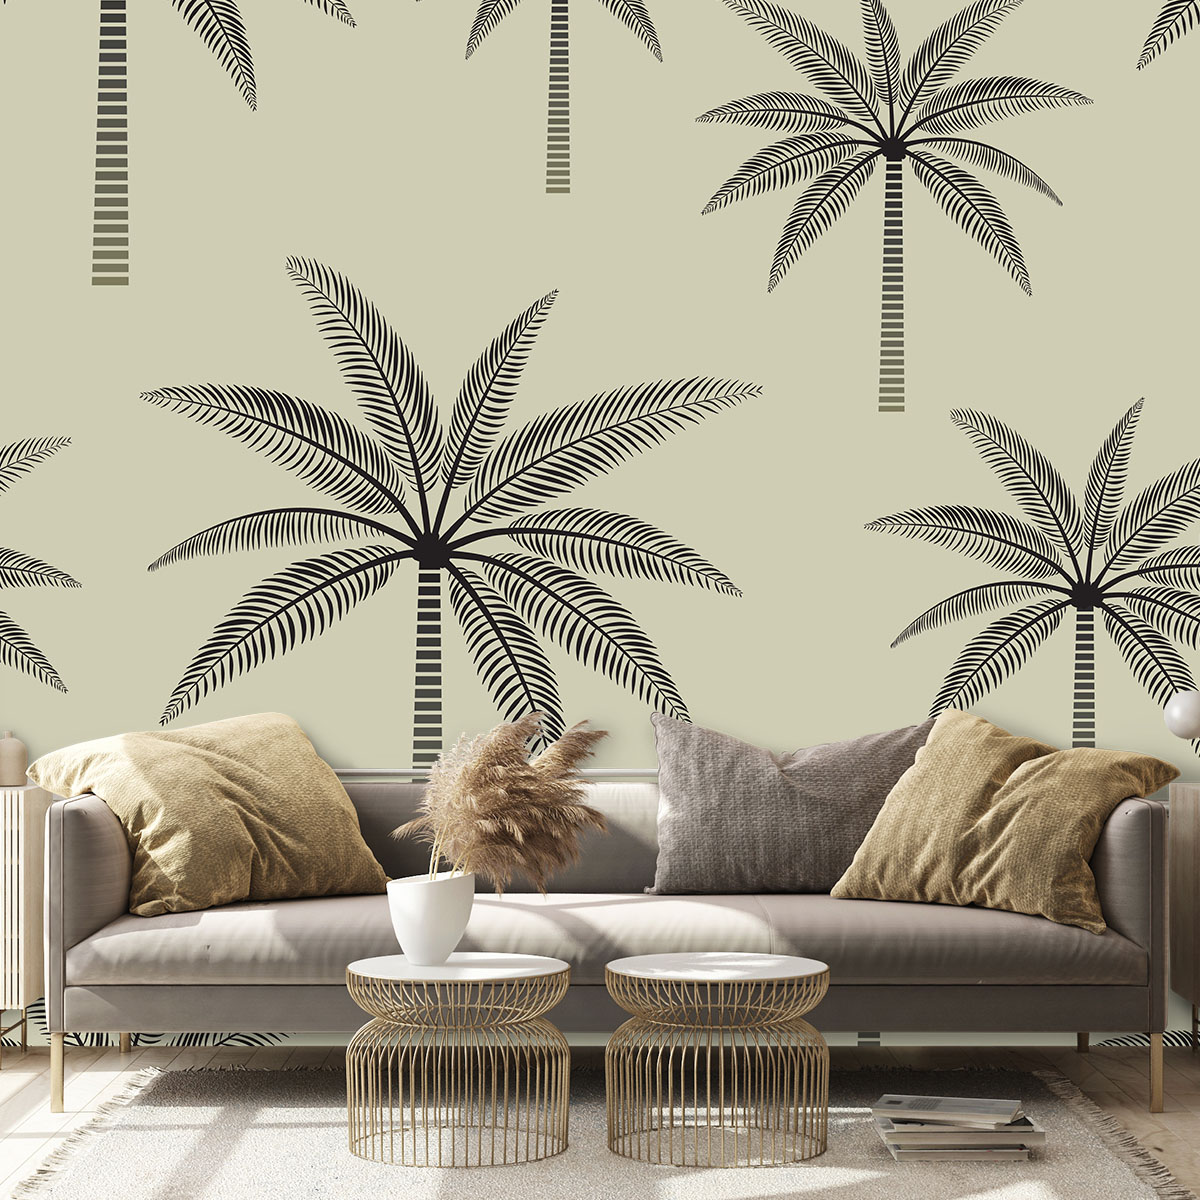 Top 5 Stylist Wallpaper Picks | Luxe Walls - Removable Wallpapers